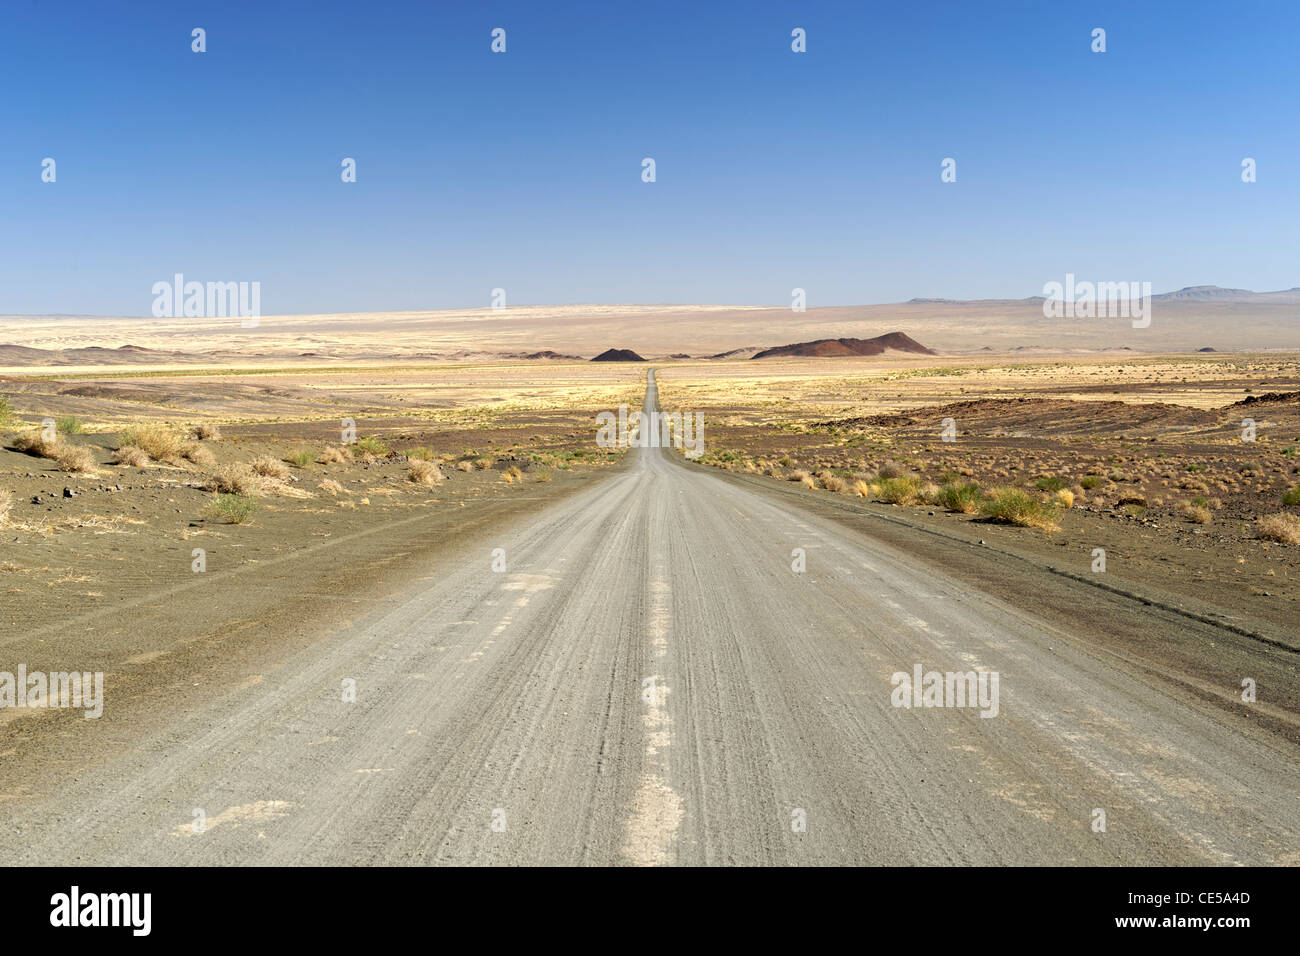 Gravel road in the Karas region of southern Namibia. Stock Photo